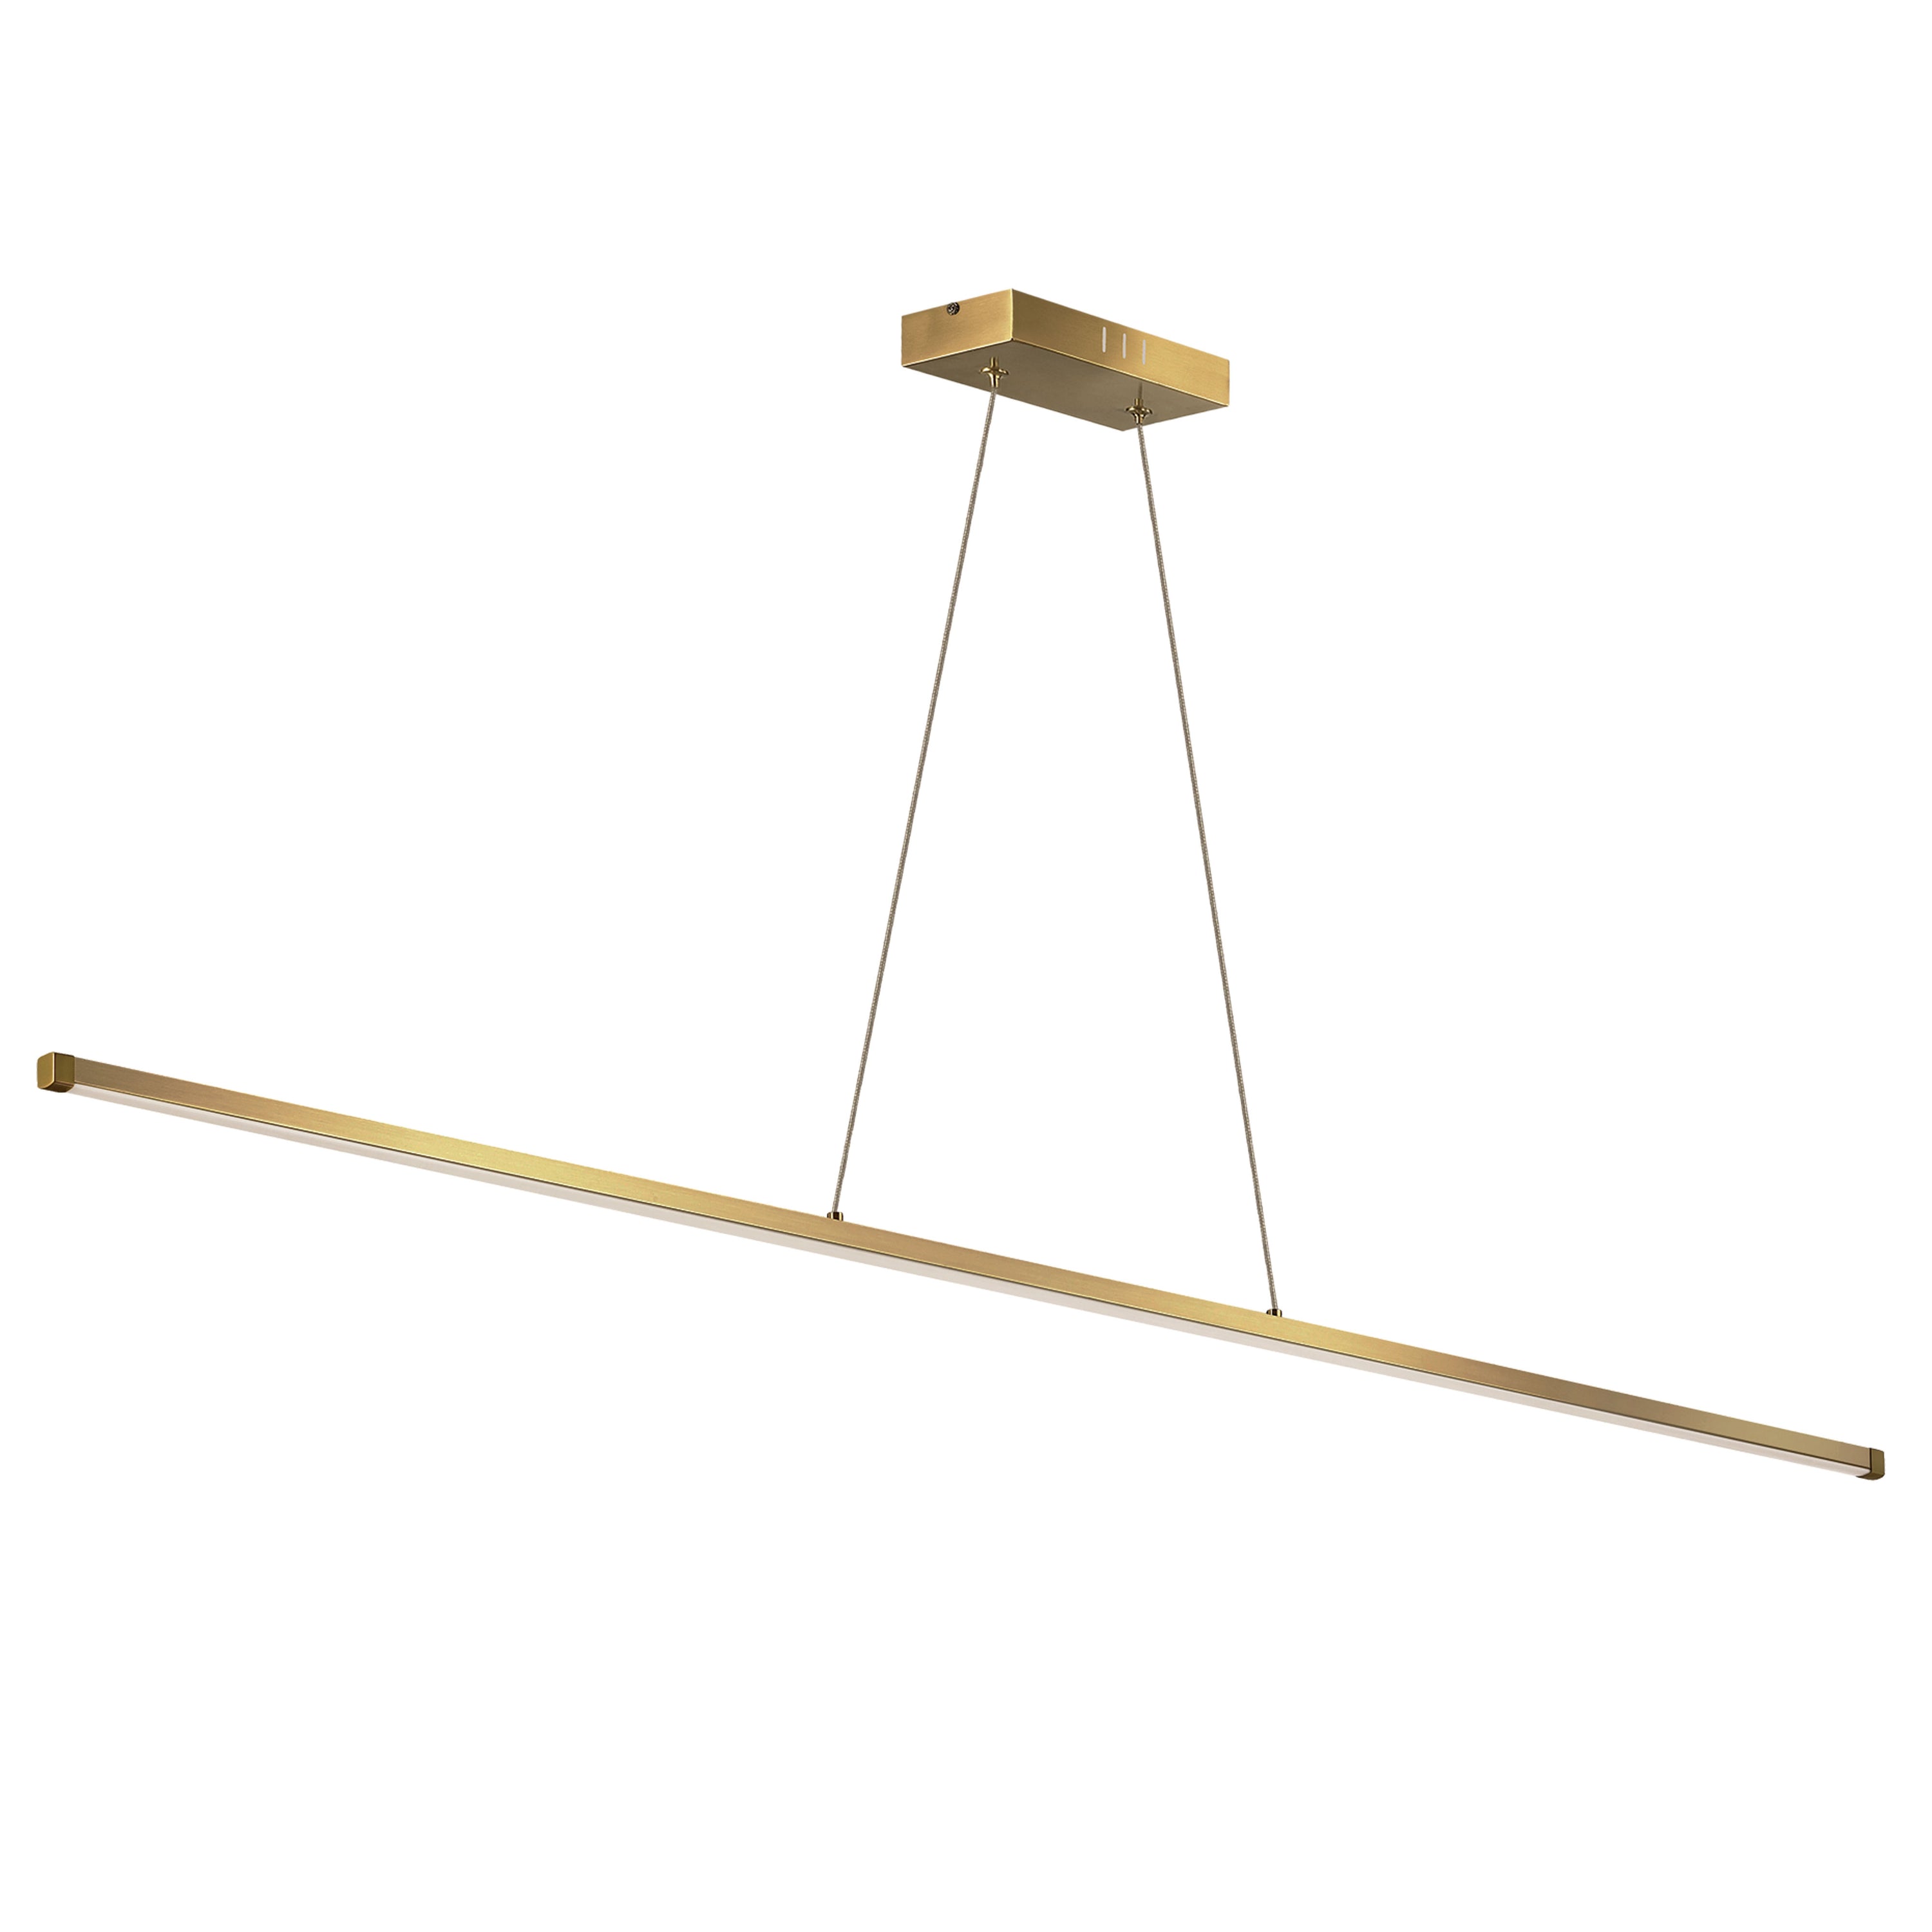 Dainolite Array - ARY-4830LEDHP-AGB - 30W LED Horizontal Pendant, Aged Brass with White Acrylic Diffuser - Aged Brass